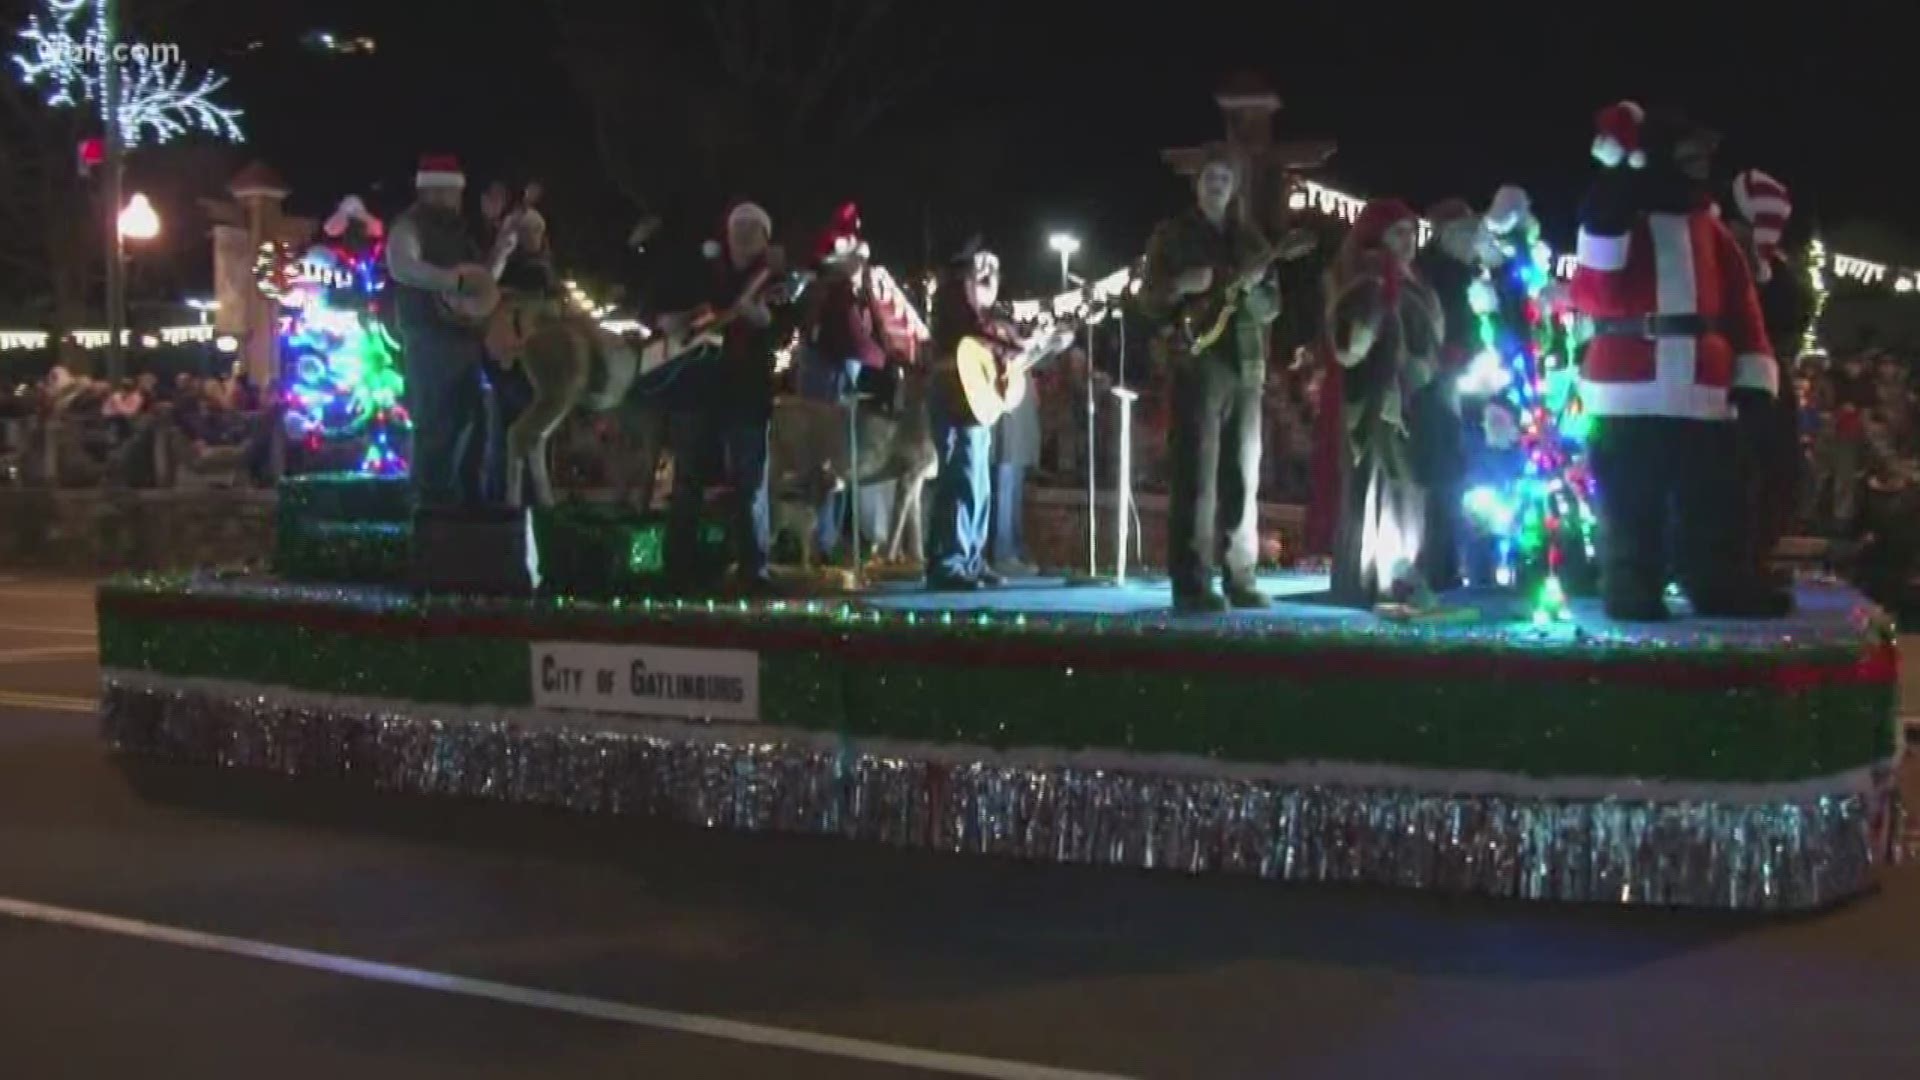 Thousands of people gathered in Gatlinburg for the 43rd annual Fantasy of Lights Parade.